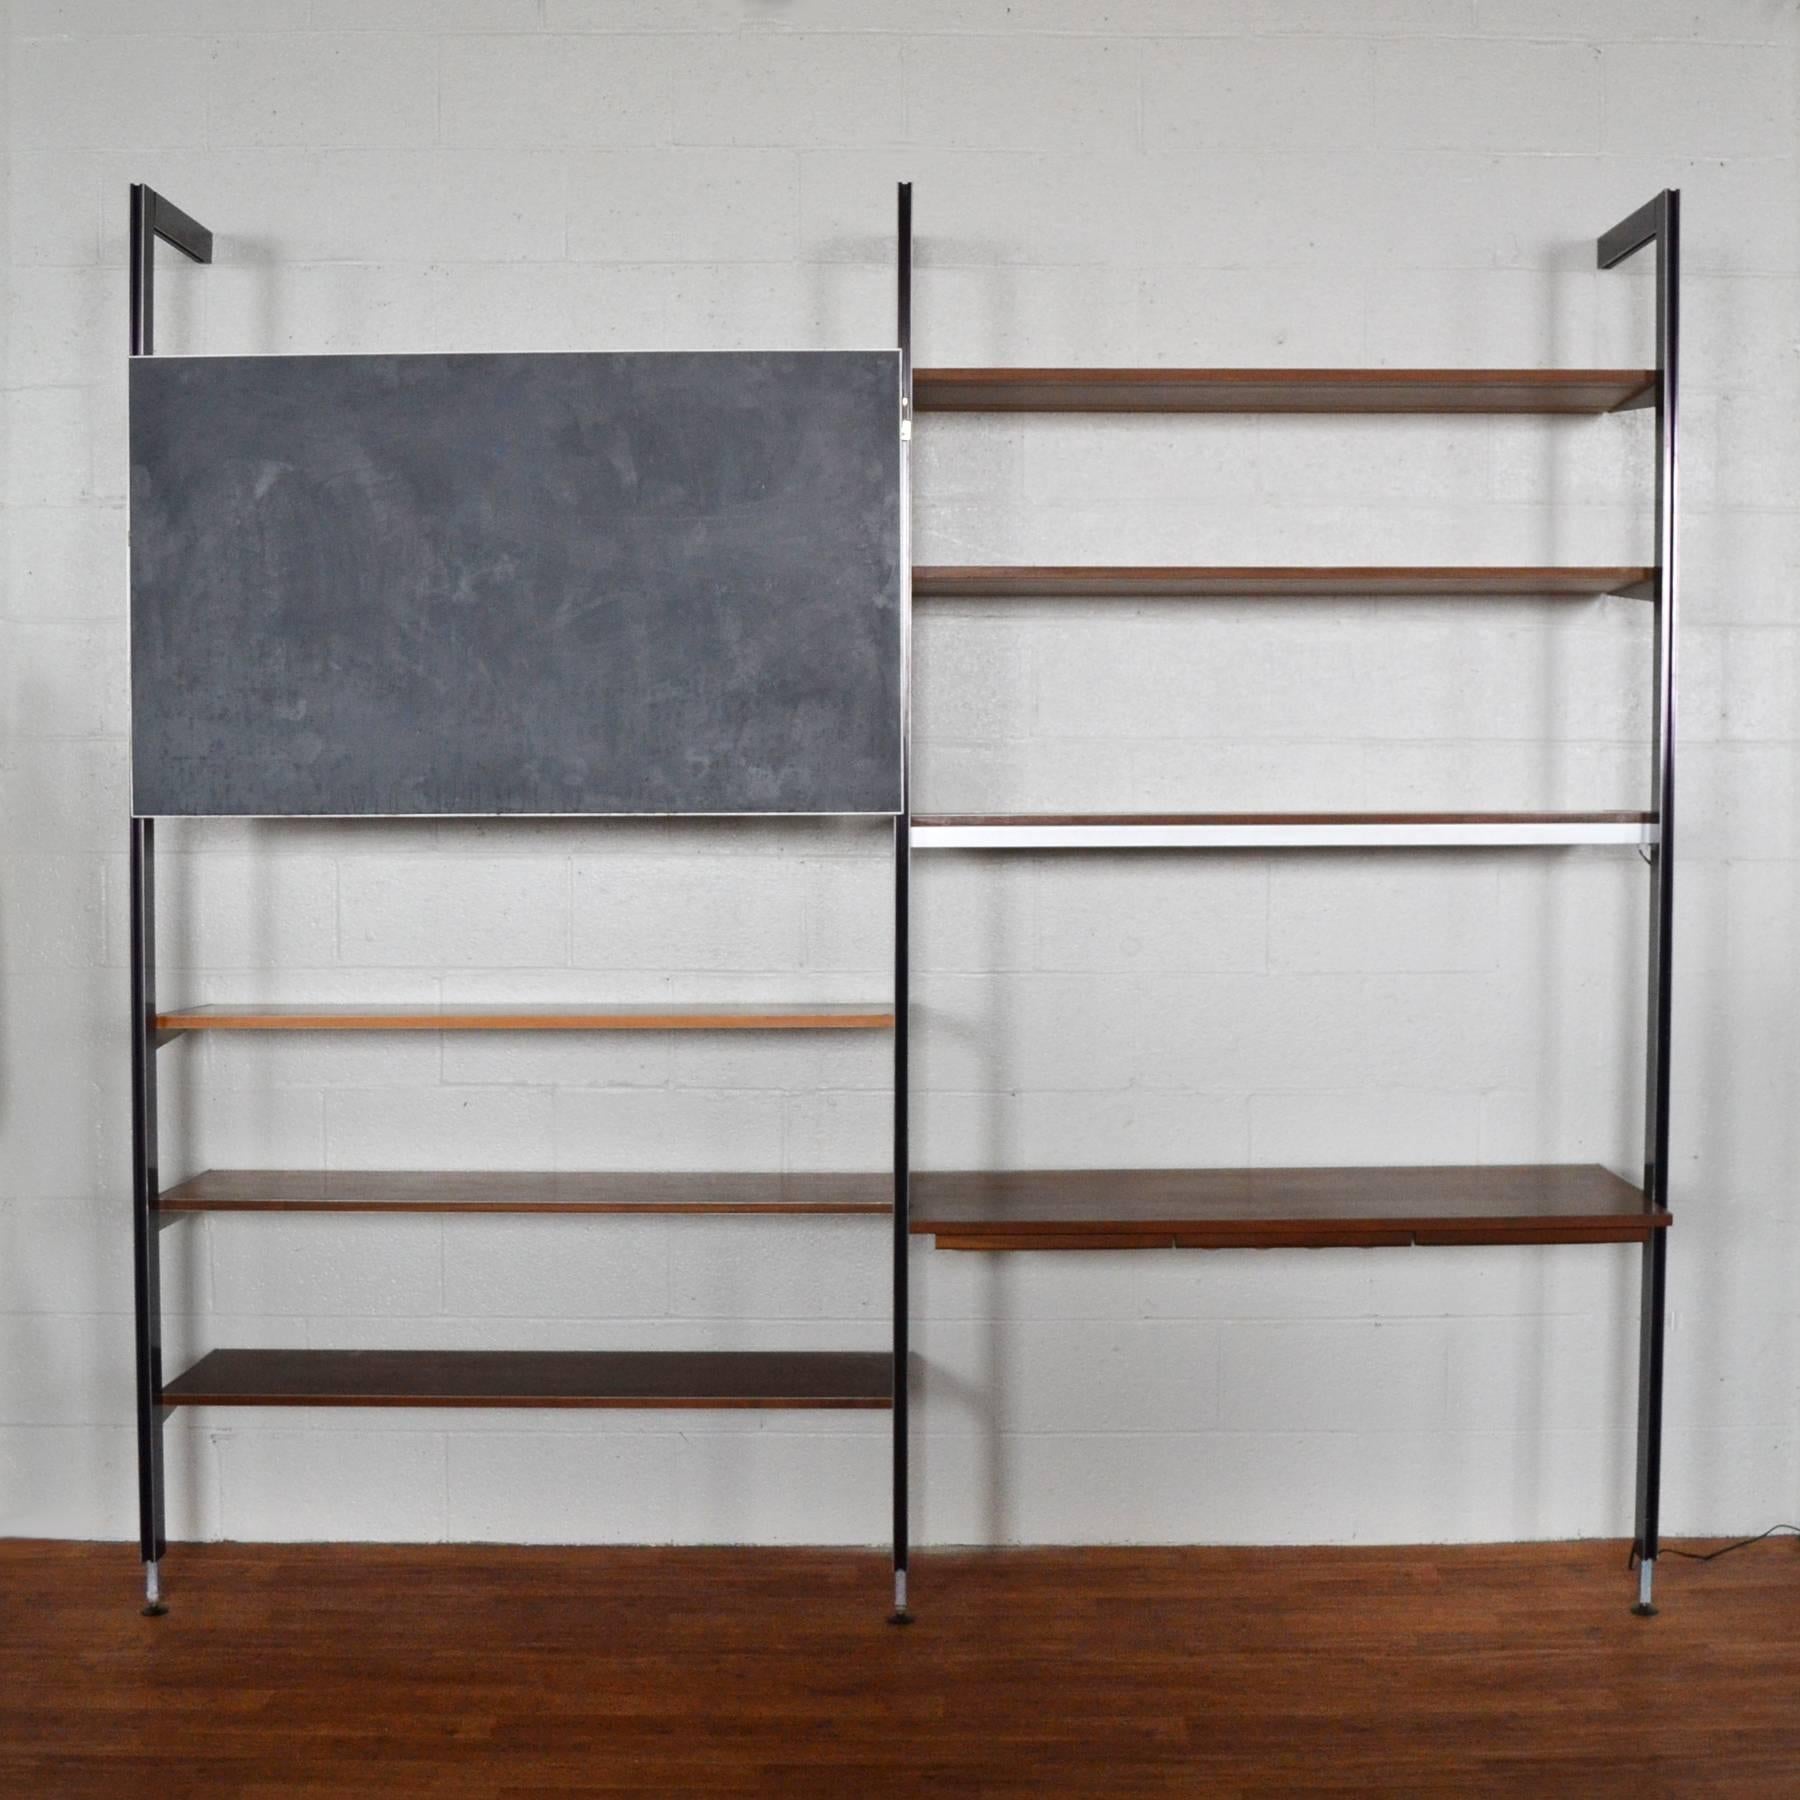 This CSS shelving unit is a very uncommon example. The beautiful Minimalist design is comprised of three tension-mounted uprights supporting six shelves, a desk with three drawers, and a rare chalkboard. One shelf has a lamp mounted to the underside